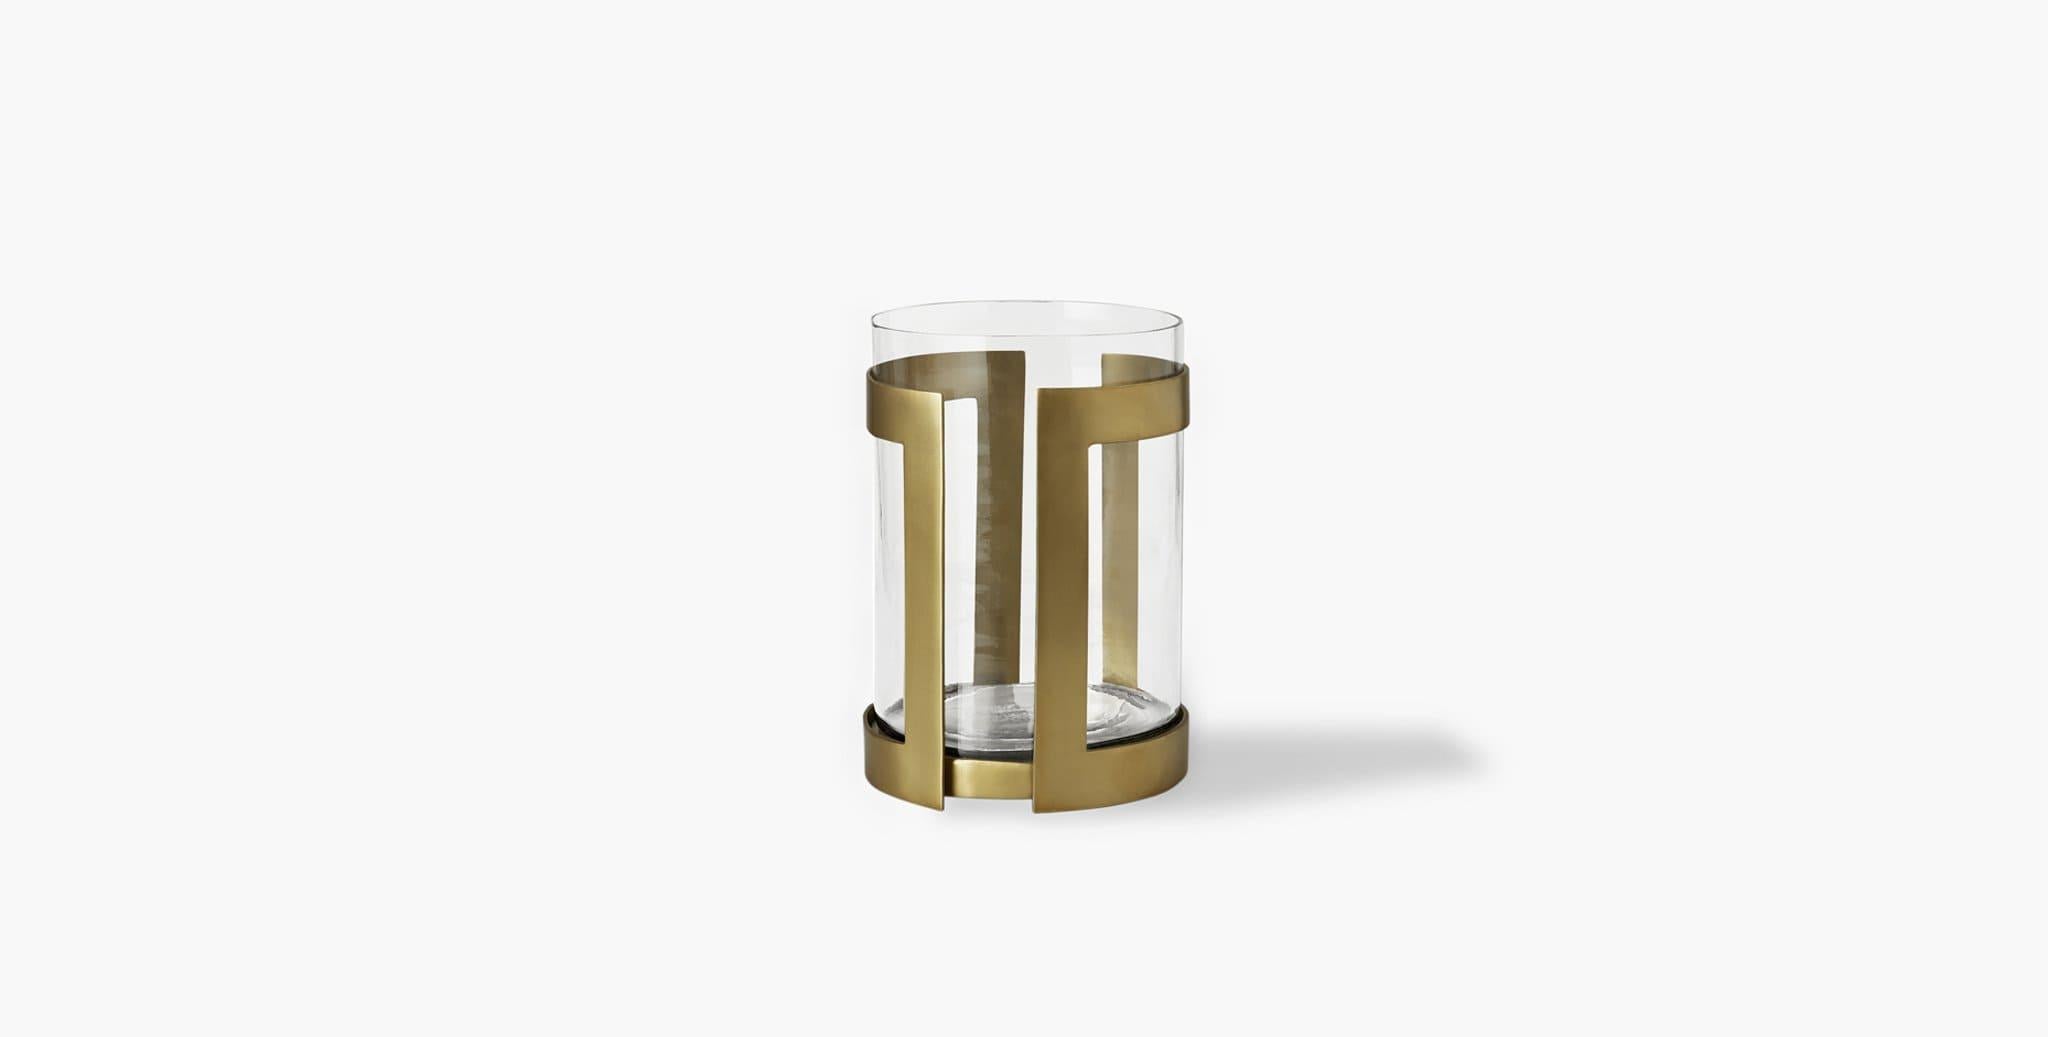 Our Thorne Brass Hurricane Candle Holder brilliantly showcases the glow of pillar candles in its minimal brass frame paired with a glass insert. Our handcrafted finishes are inspired by variations within natural textures. Each selection is slightly